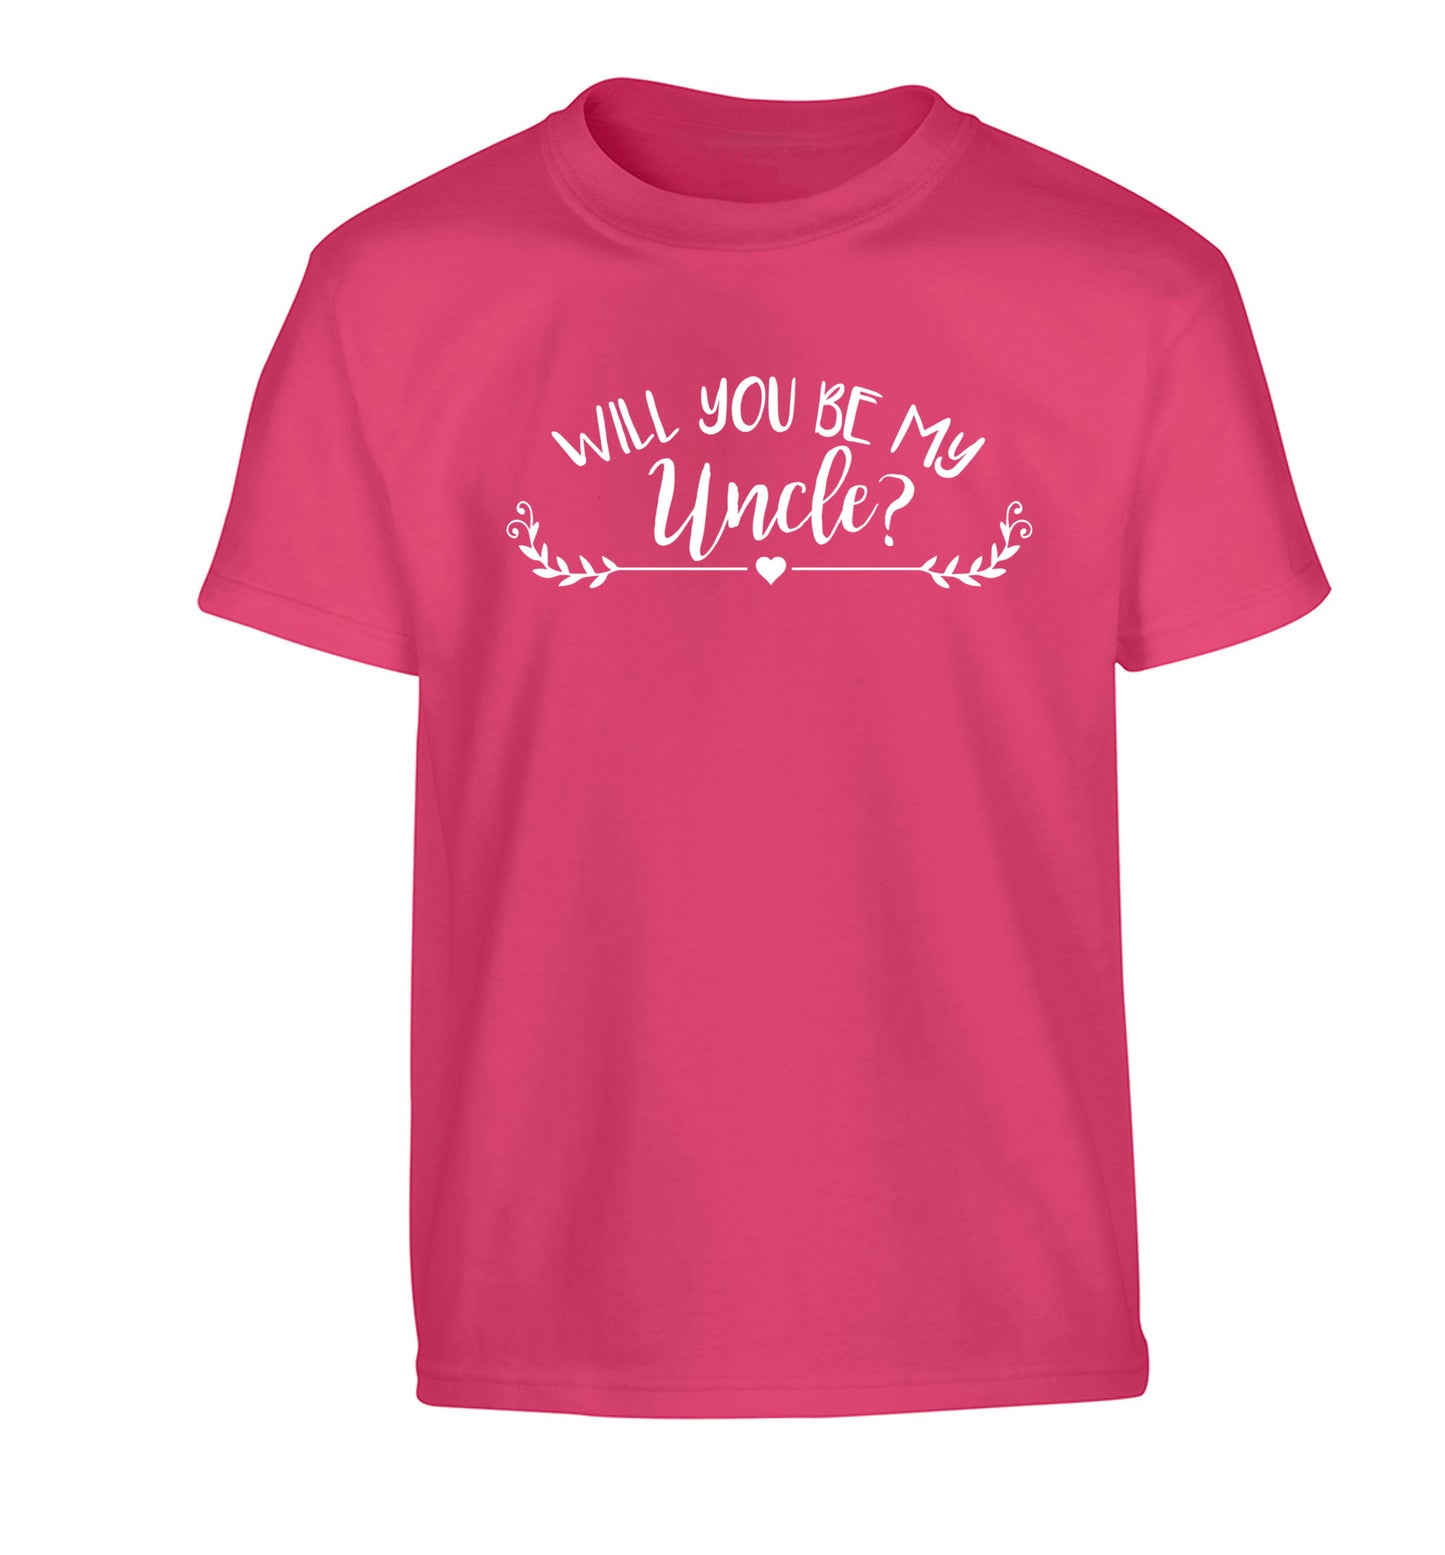 Will you be my uncle? Children's pink Tshirt 12-14 Years